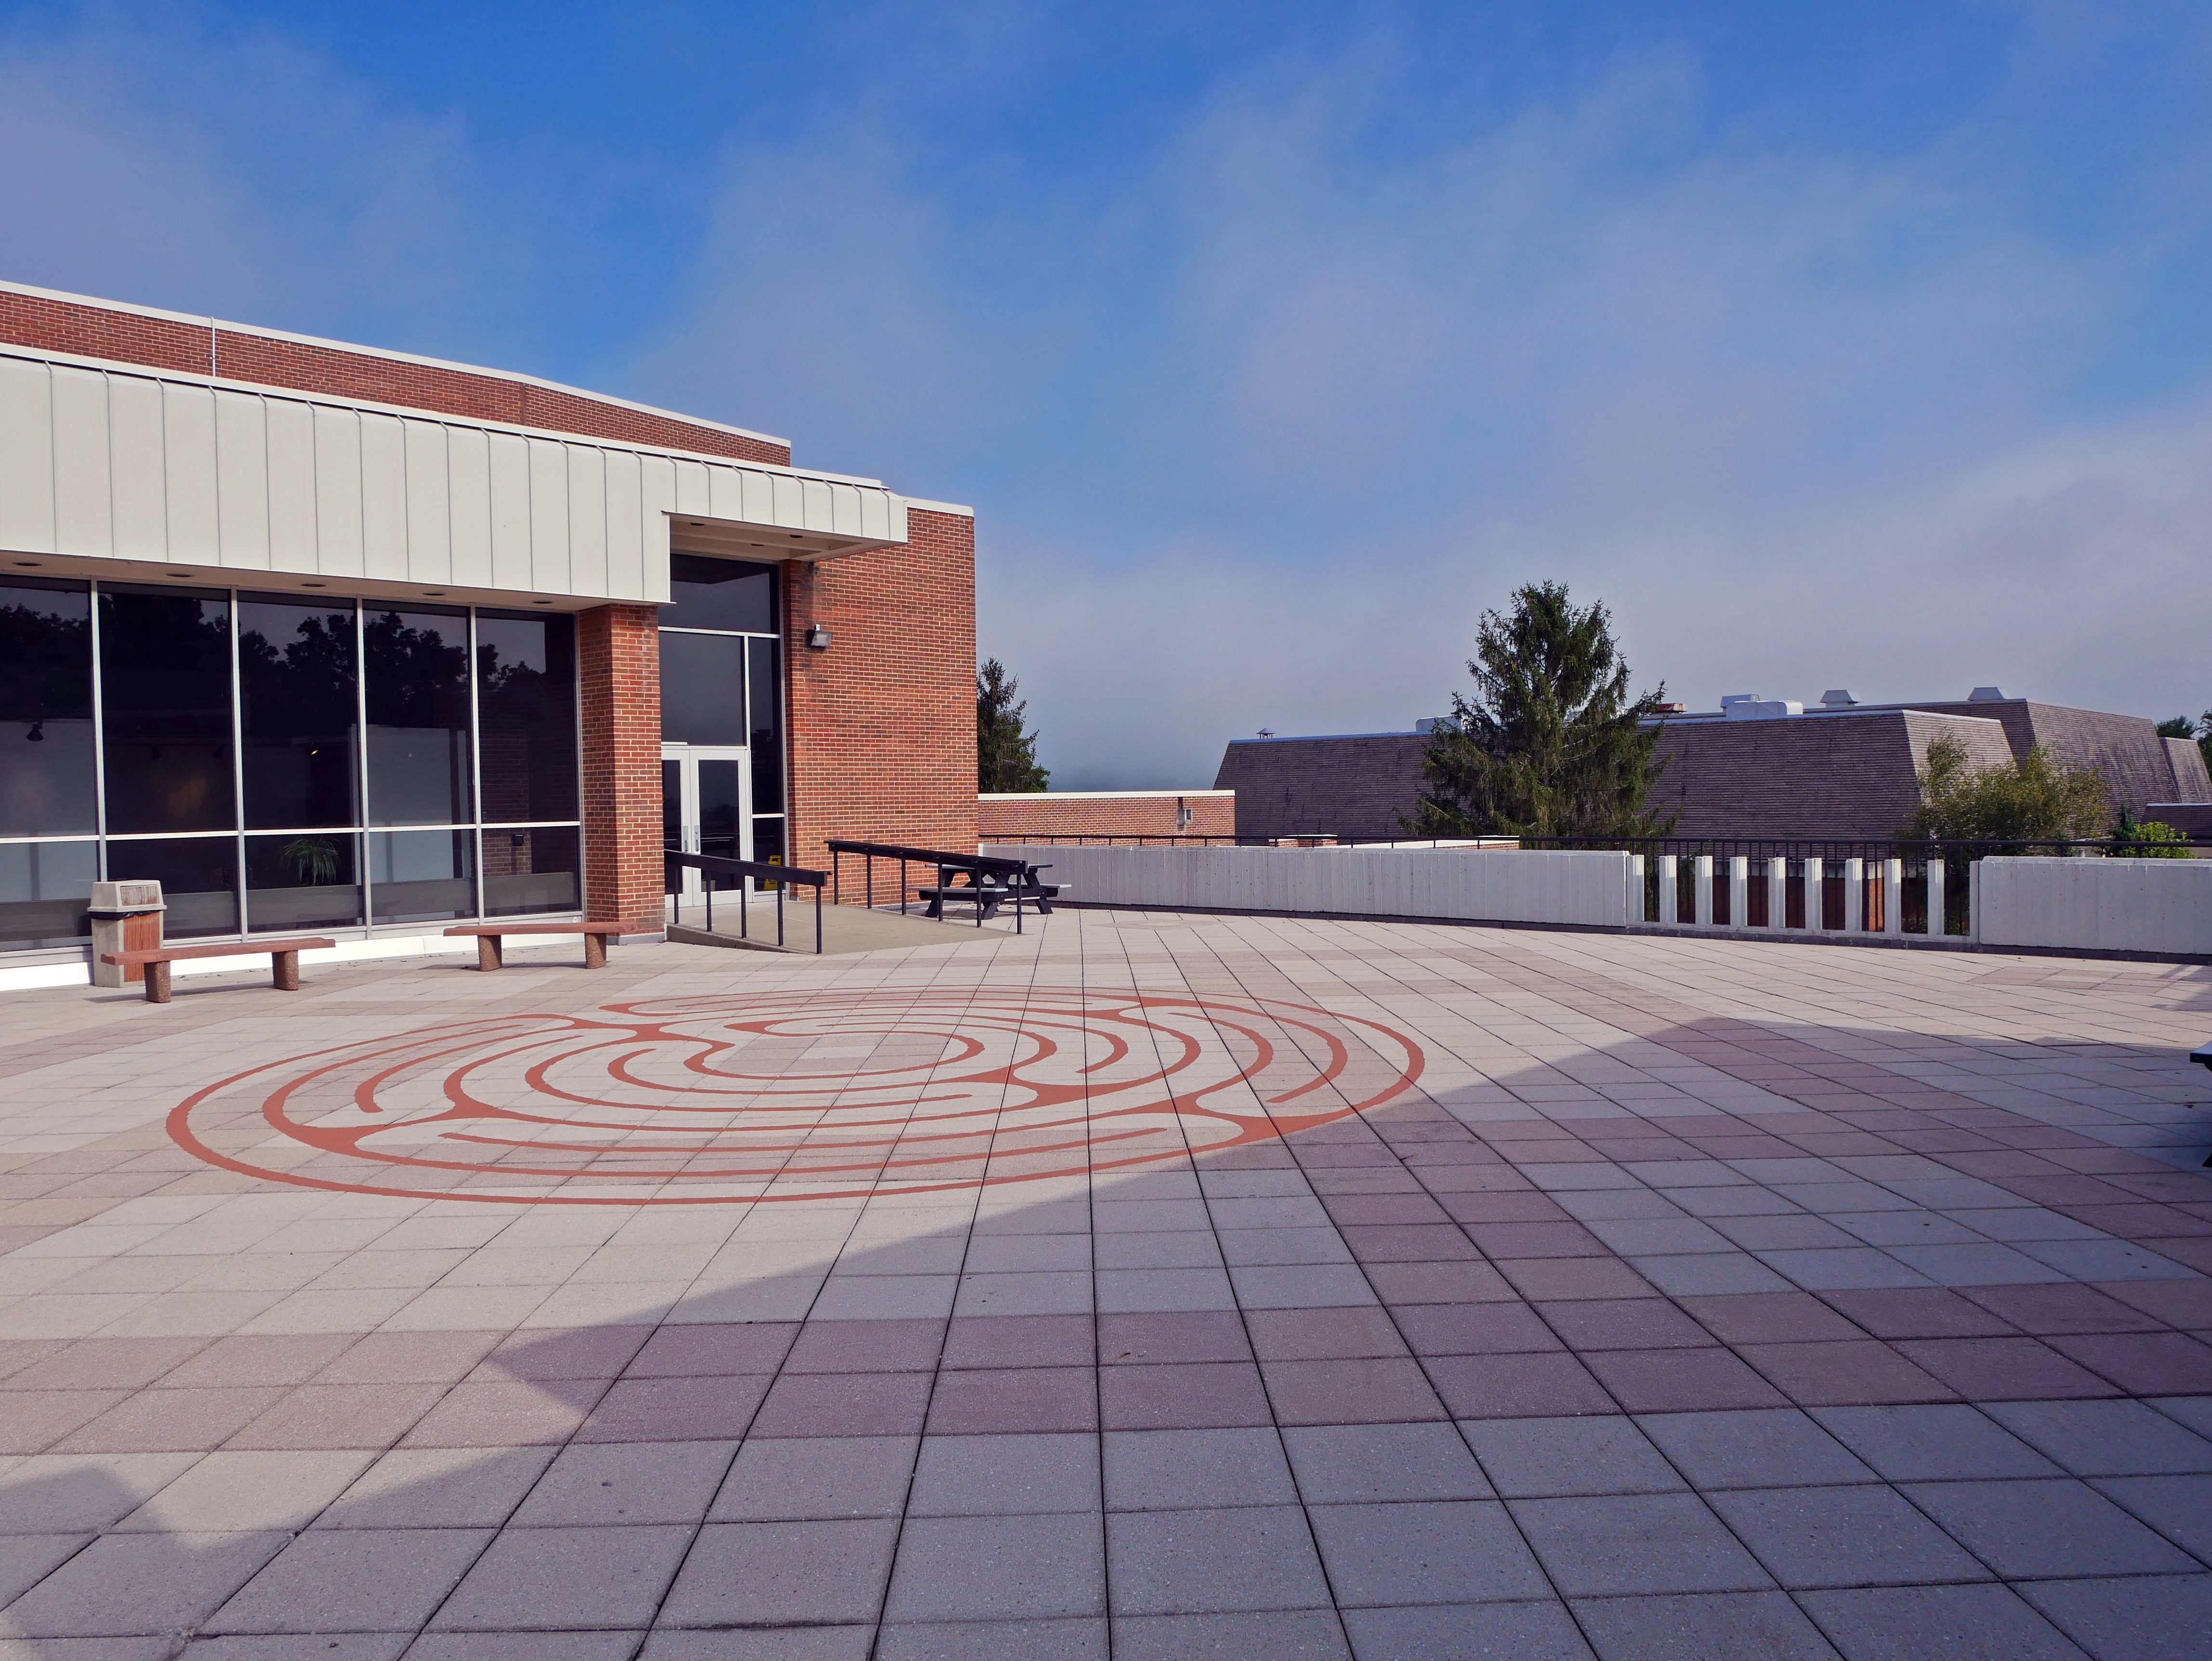 The Concord University Labyrinth, located on top of the Alexander Fine Arts Building